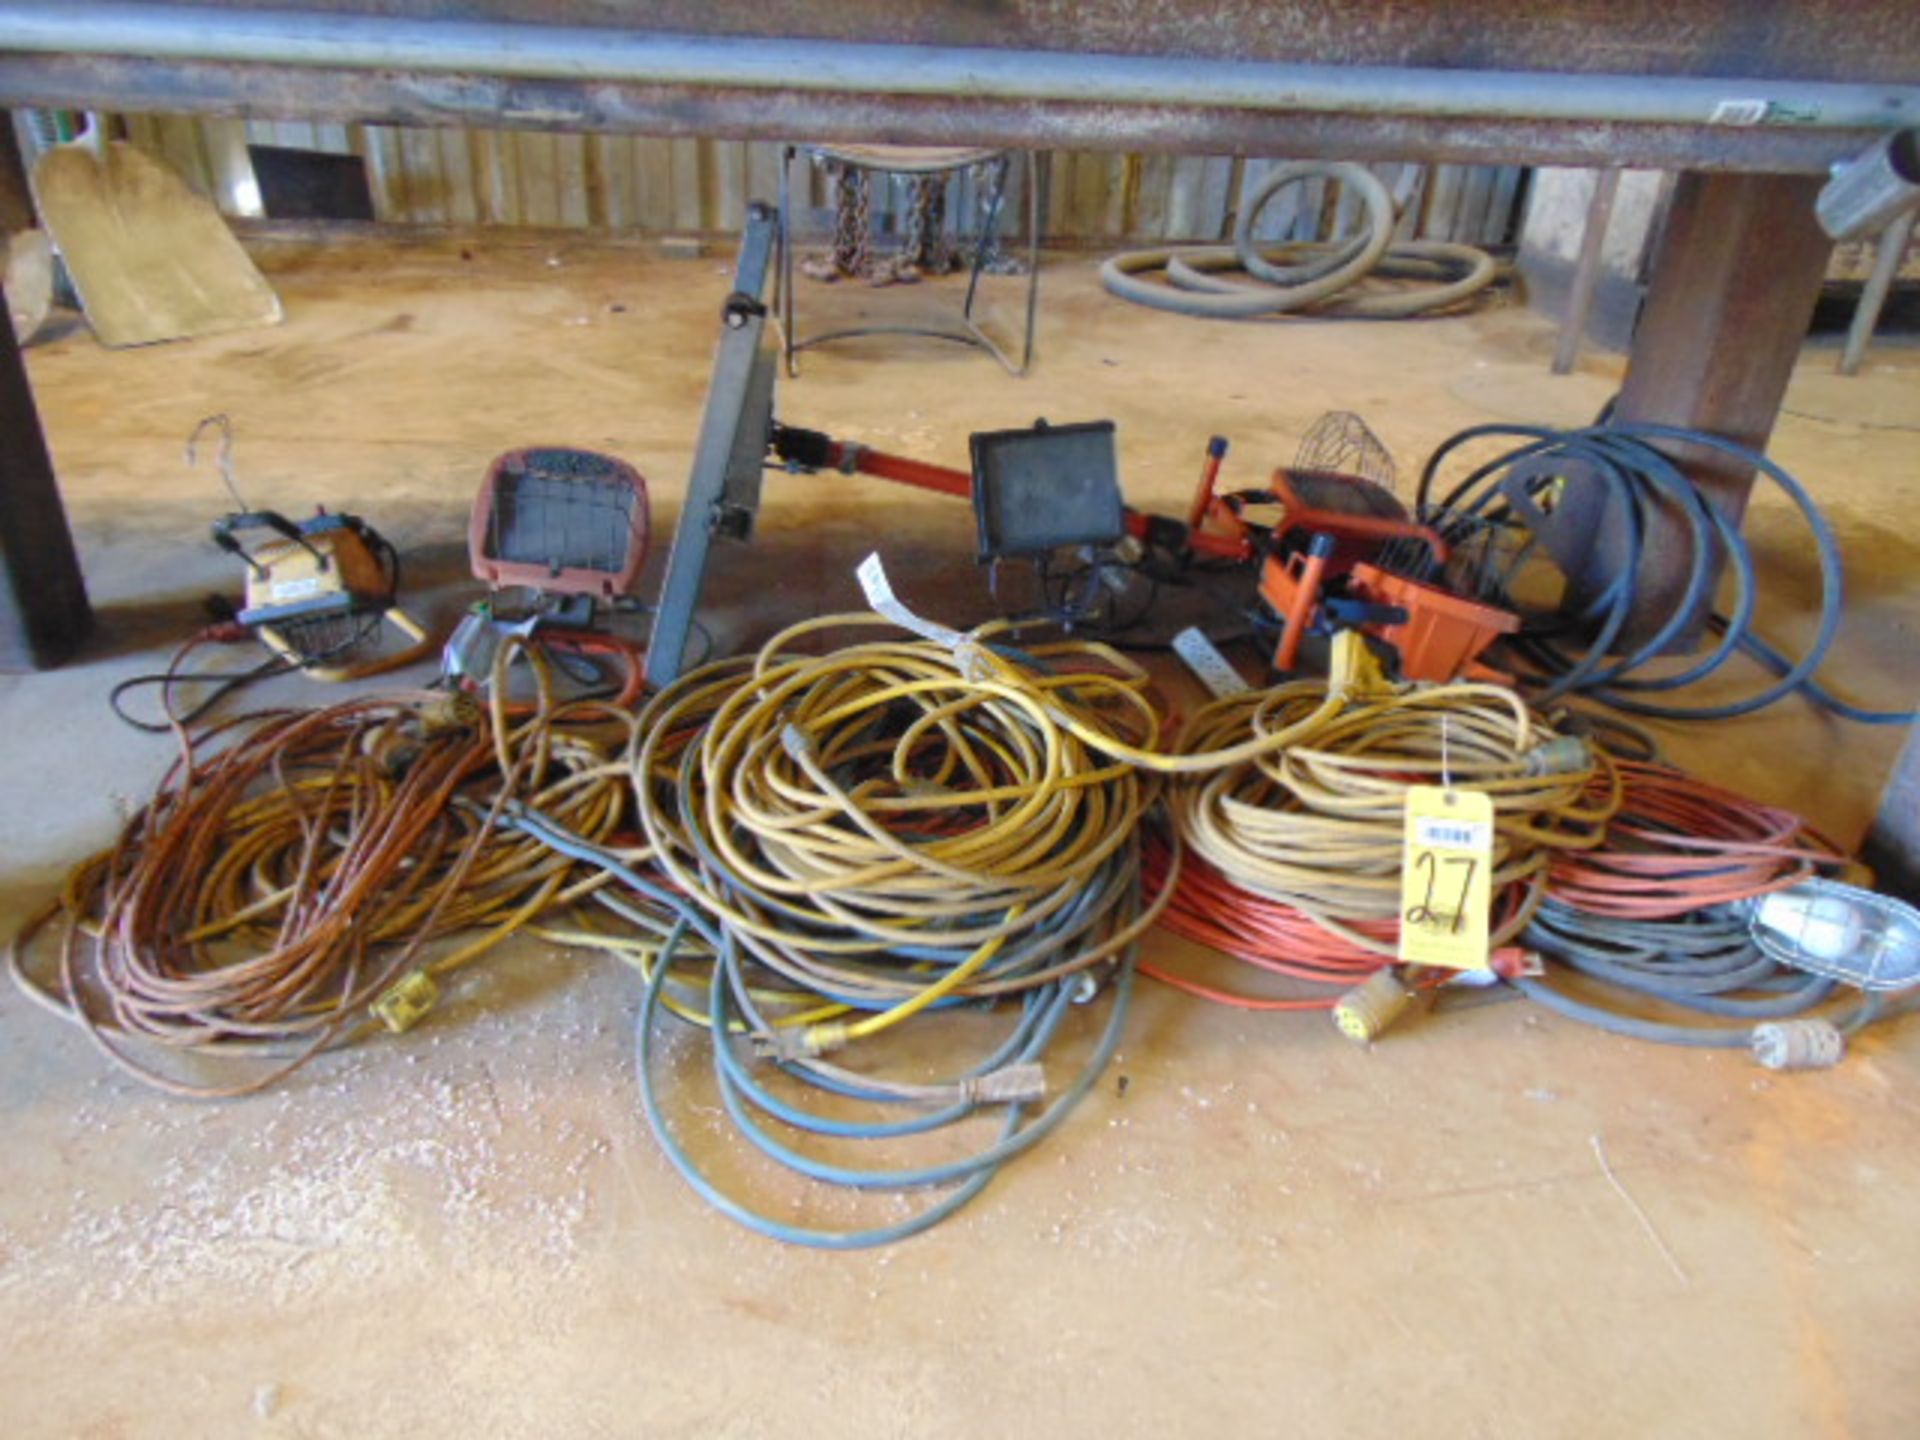 LOT OF ELECTRIC EXTENSION CORDS & LIGHTS (under one table)